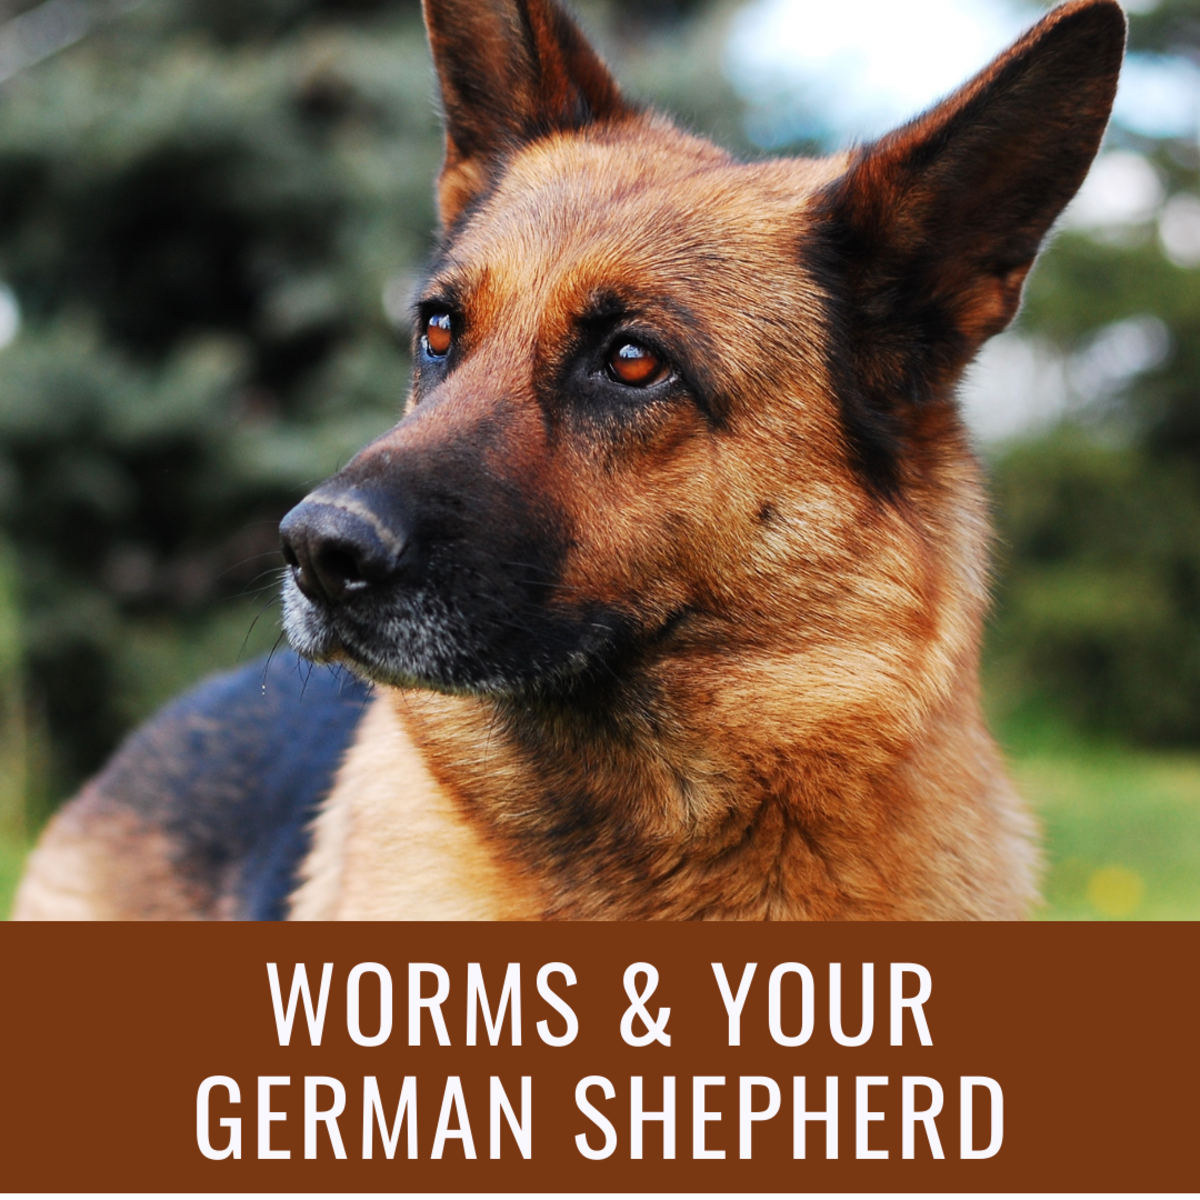 Preventing and Remedying Worms in German Shepherds